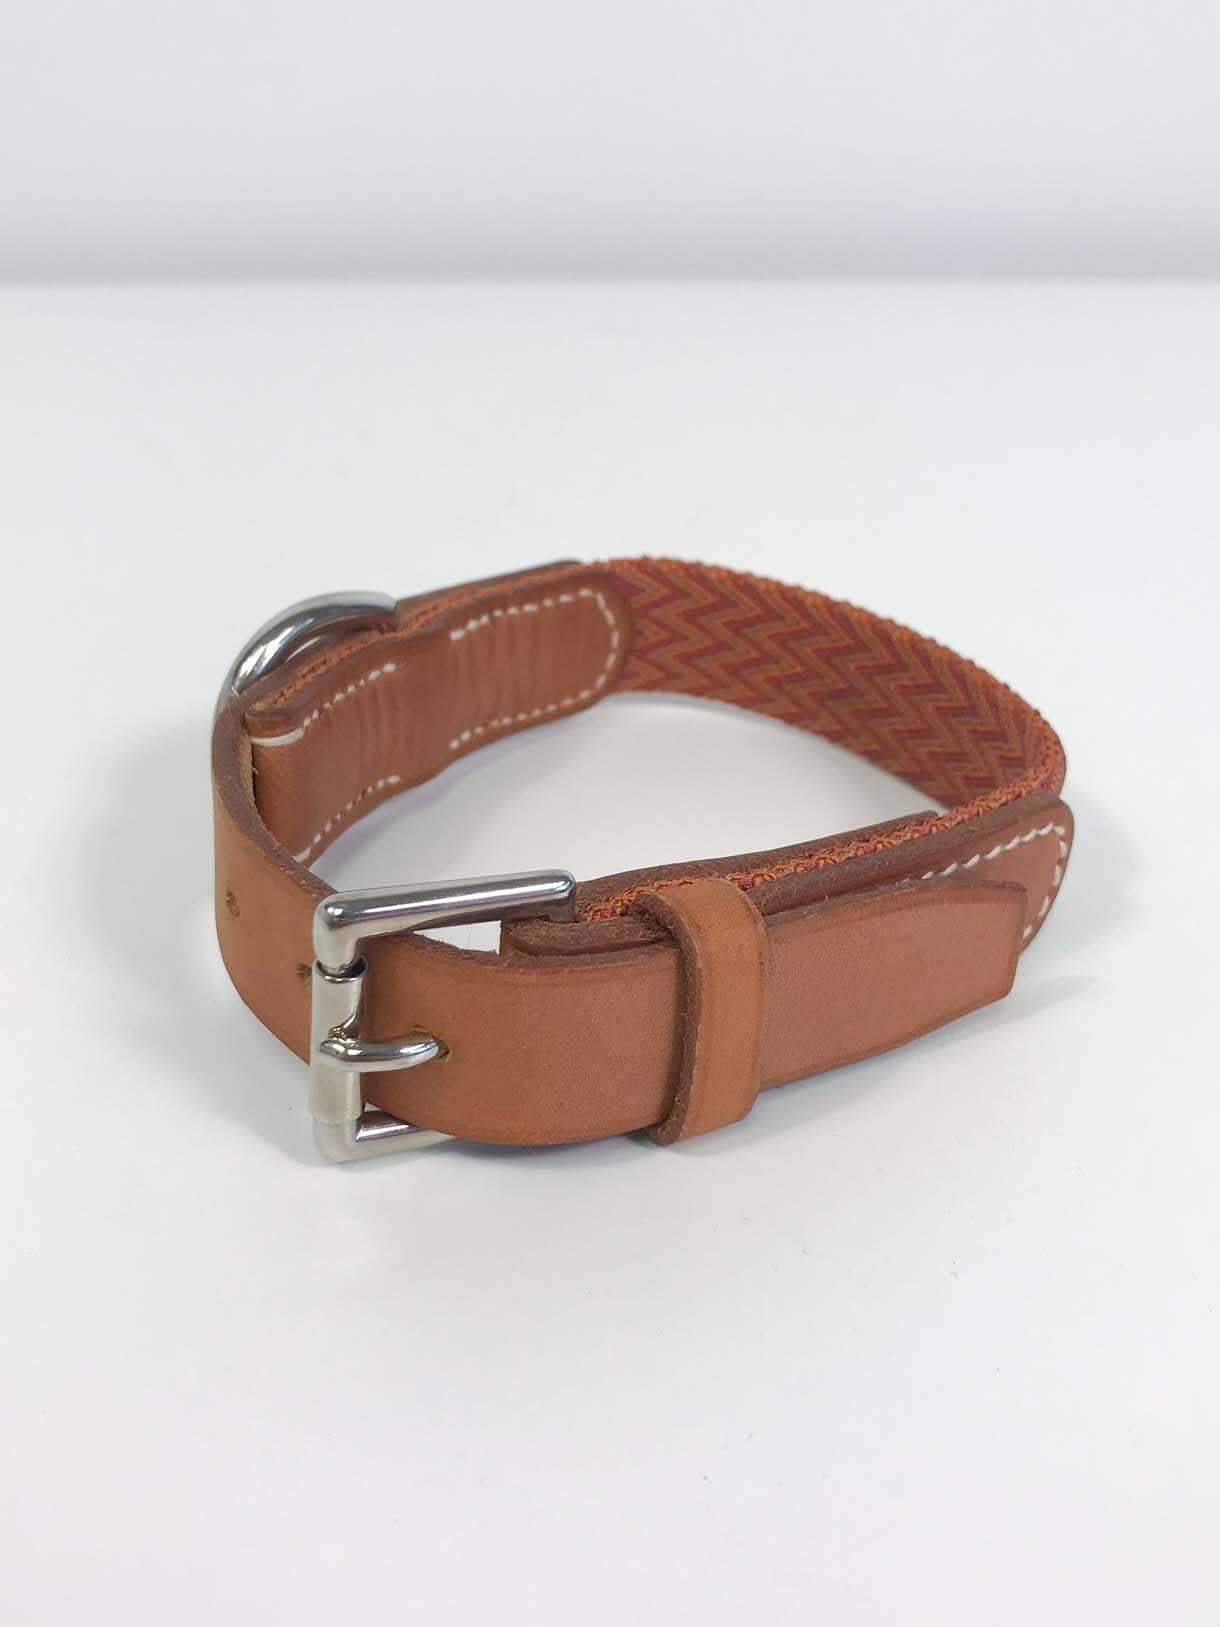 Hermès leather dog collar with woven multi-color canvas insert. Wear consistent with light use, rare piece.